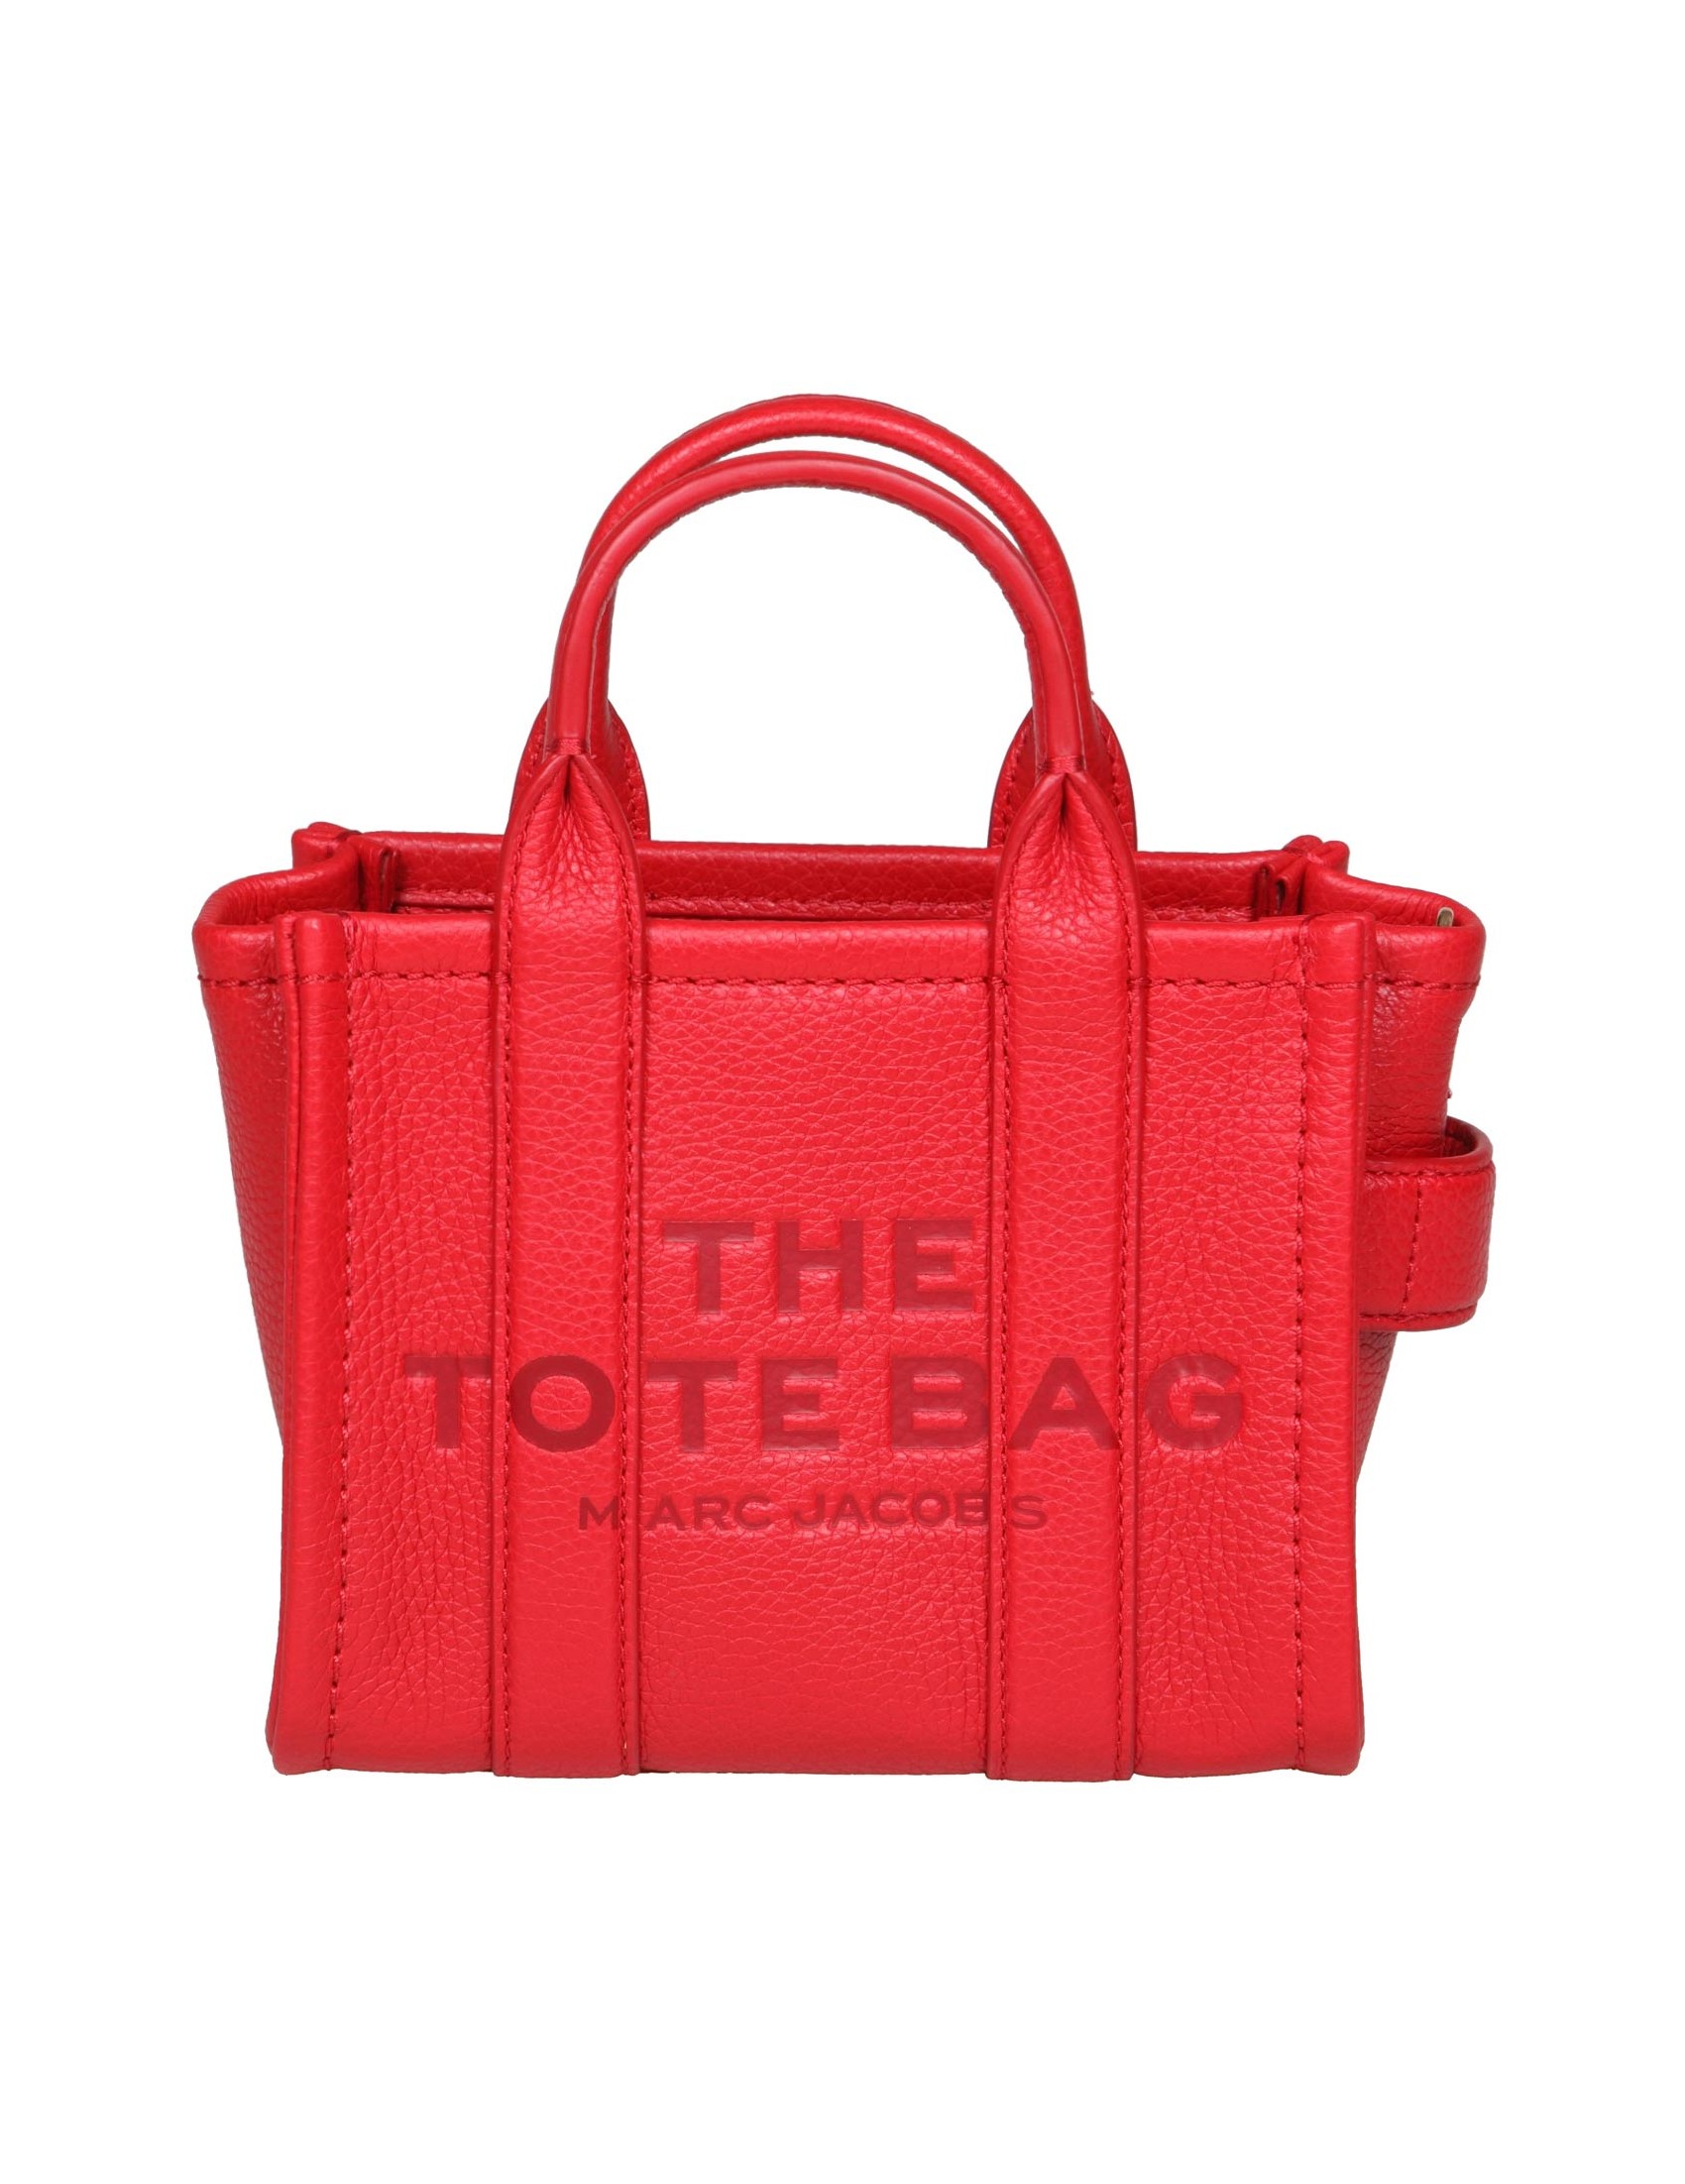 MARC JACOBS MICRO TOTE IN RED LEATHER